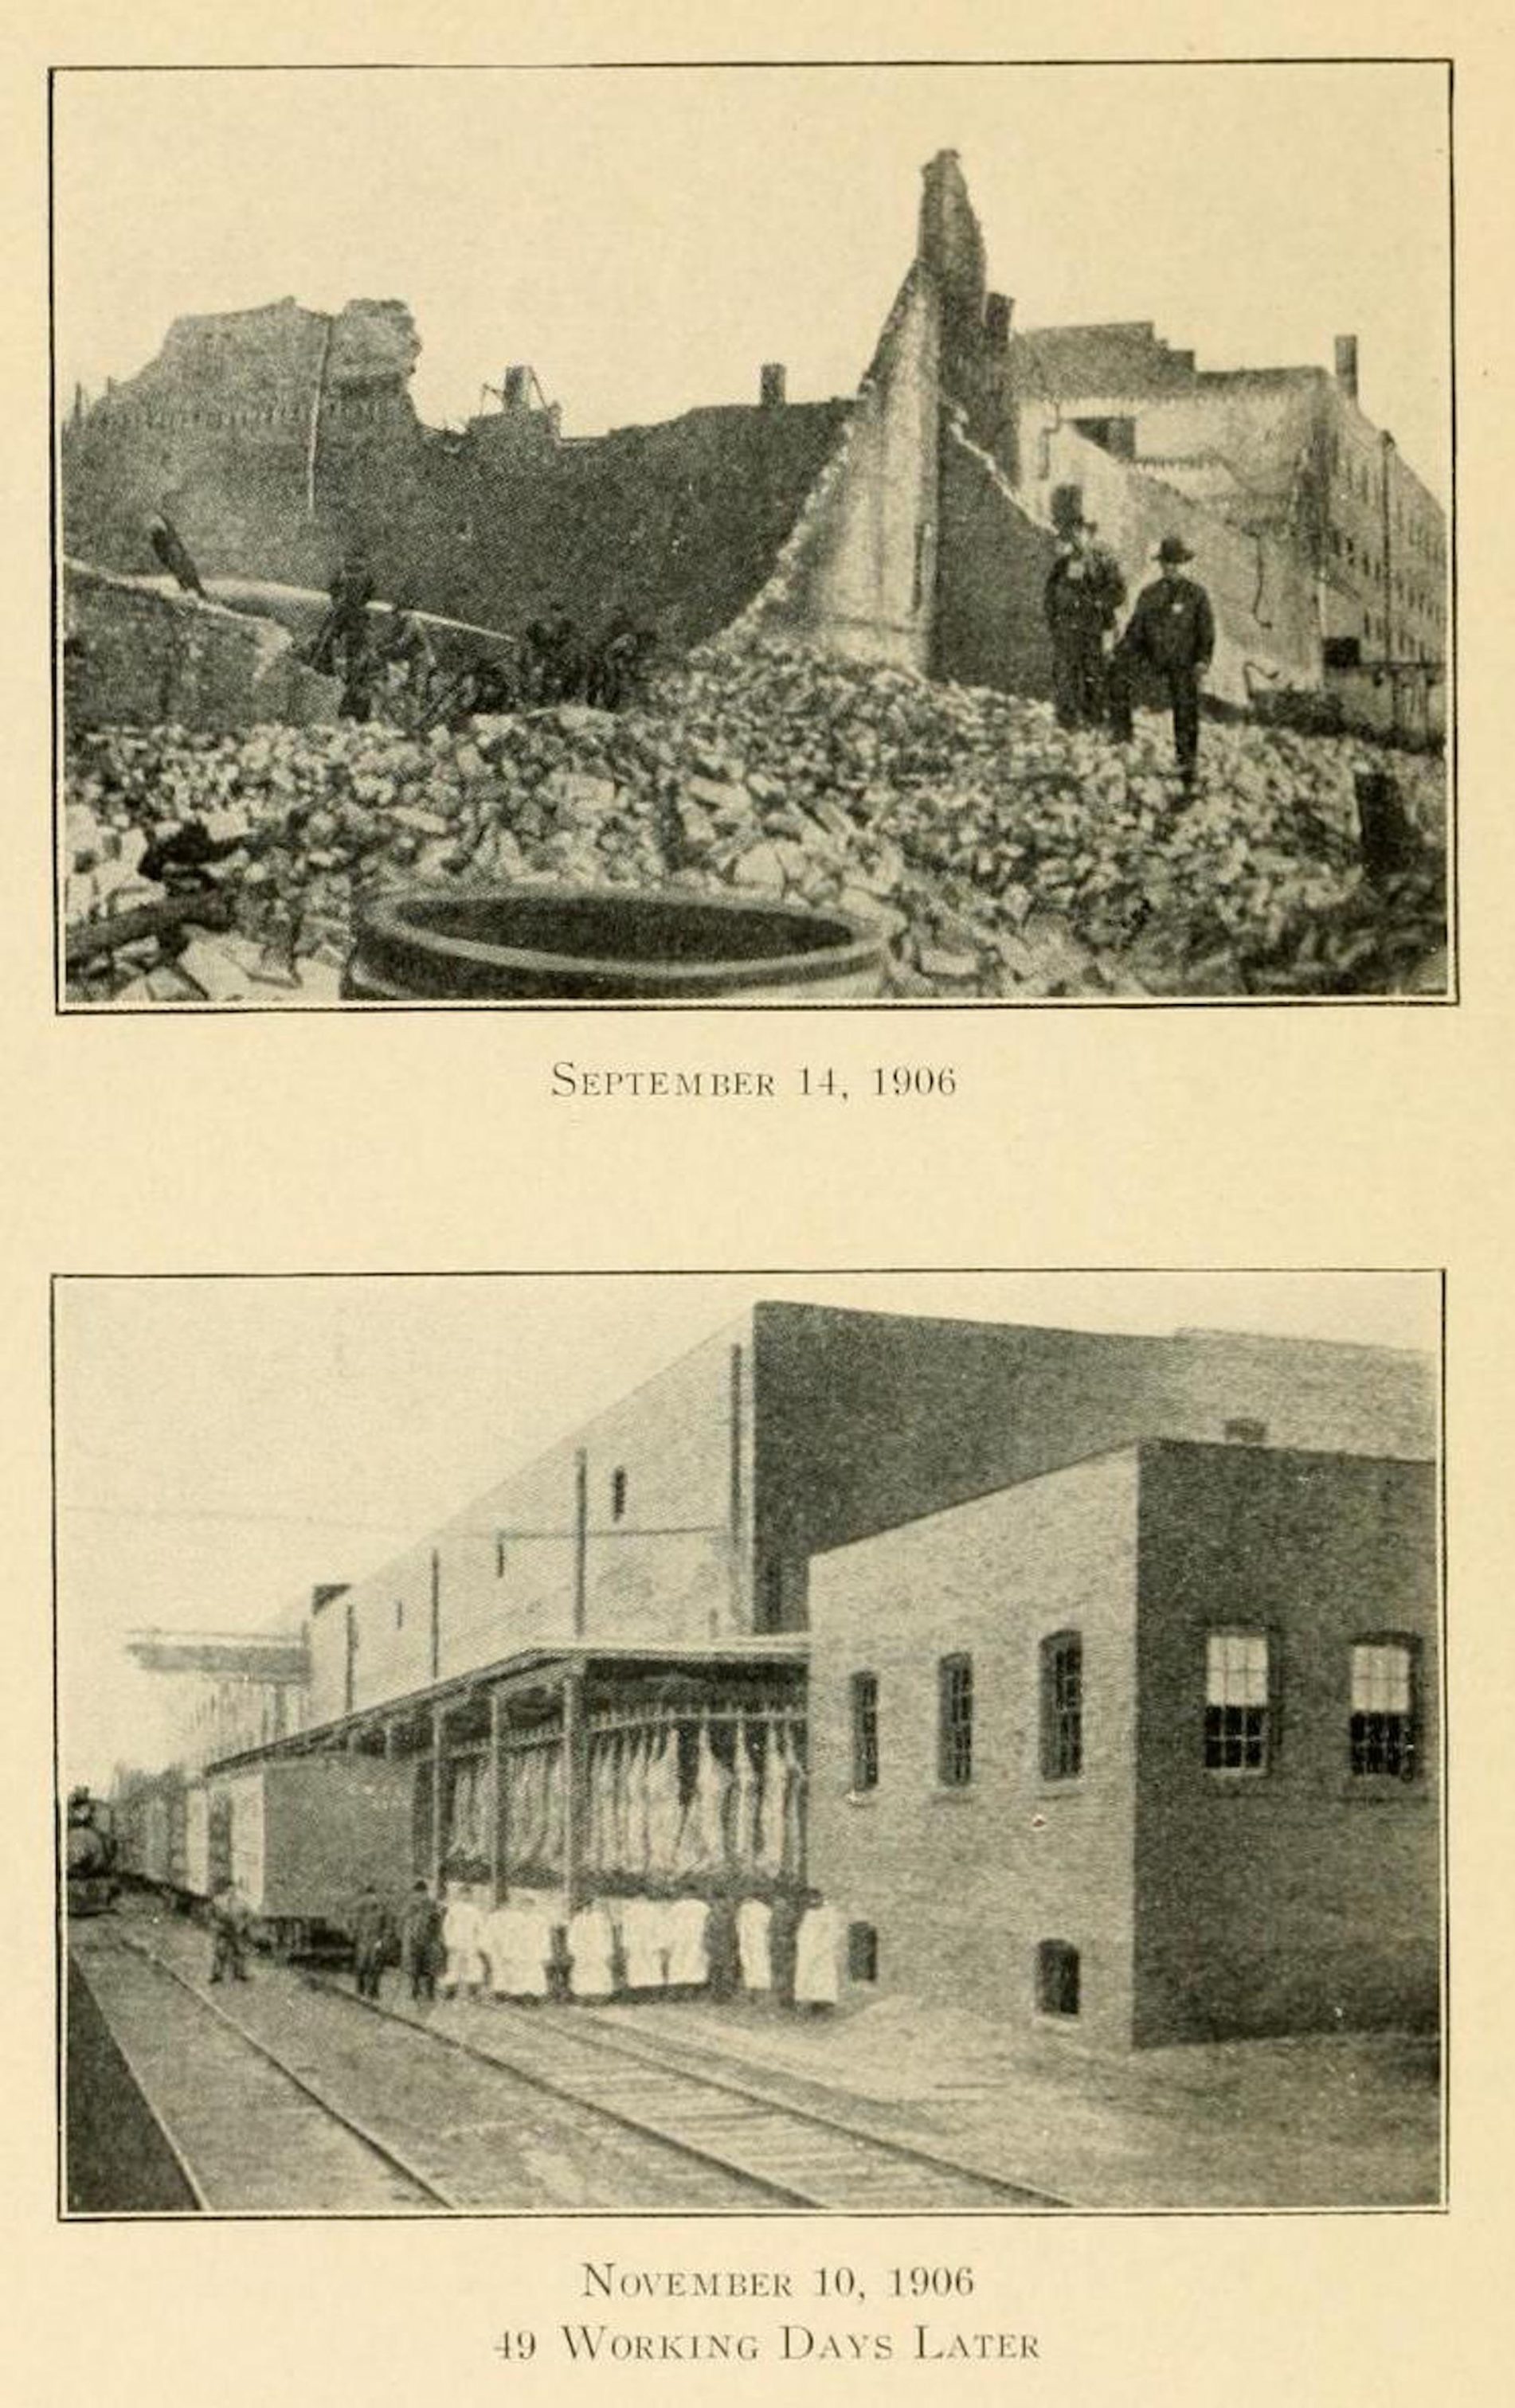 In September 1906, the Cudahy Brothers plant caught fire and sustained significant damage. However, as illustrated by these images, the building was restored and running 49 days later. 